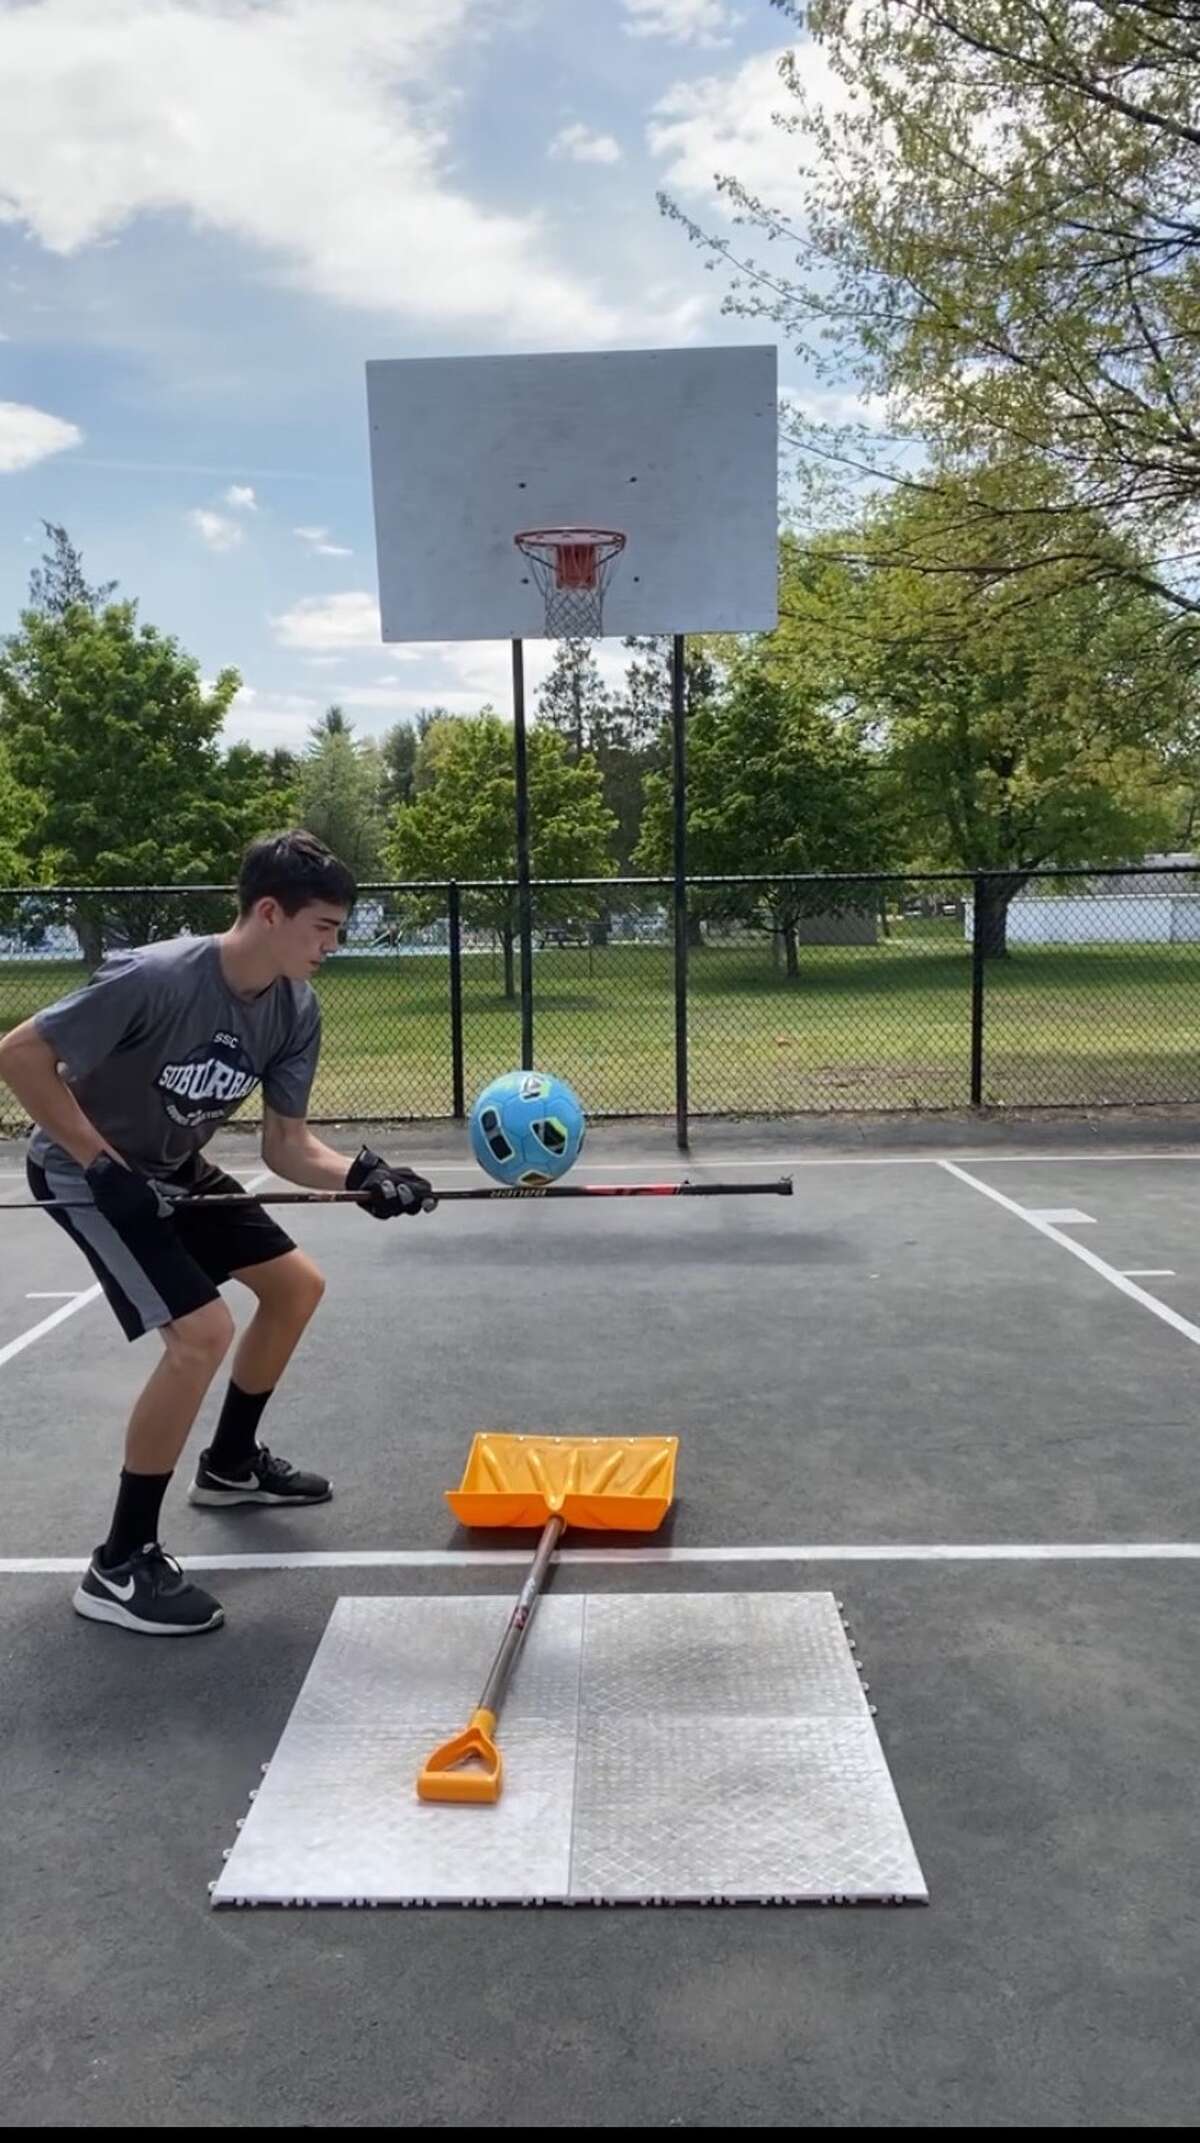 Carson Curran, a 17-year-old from Clifton Park, creates viral videos of trick shots.